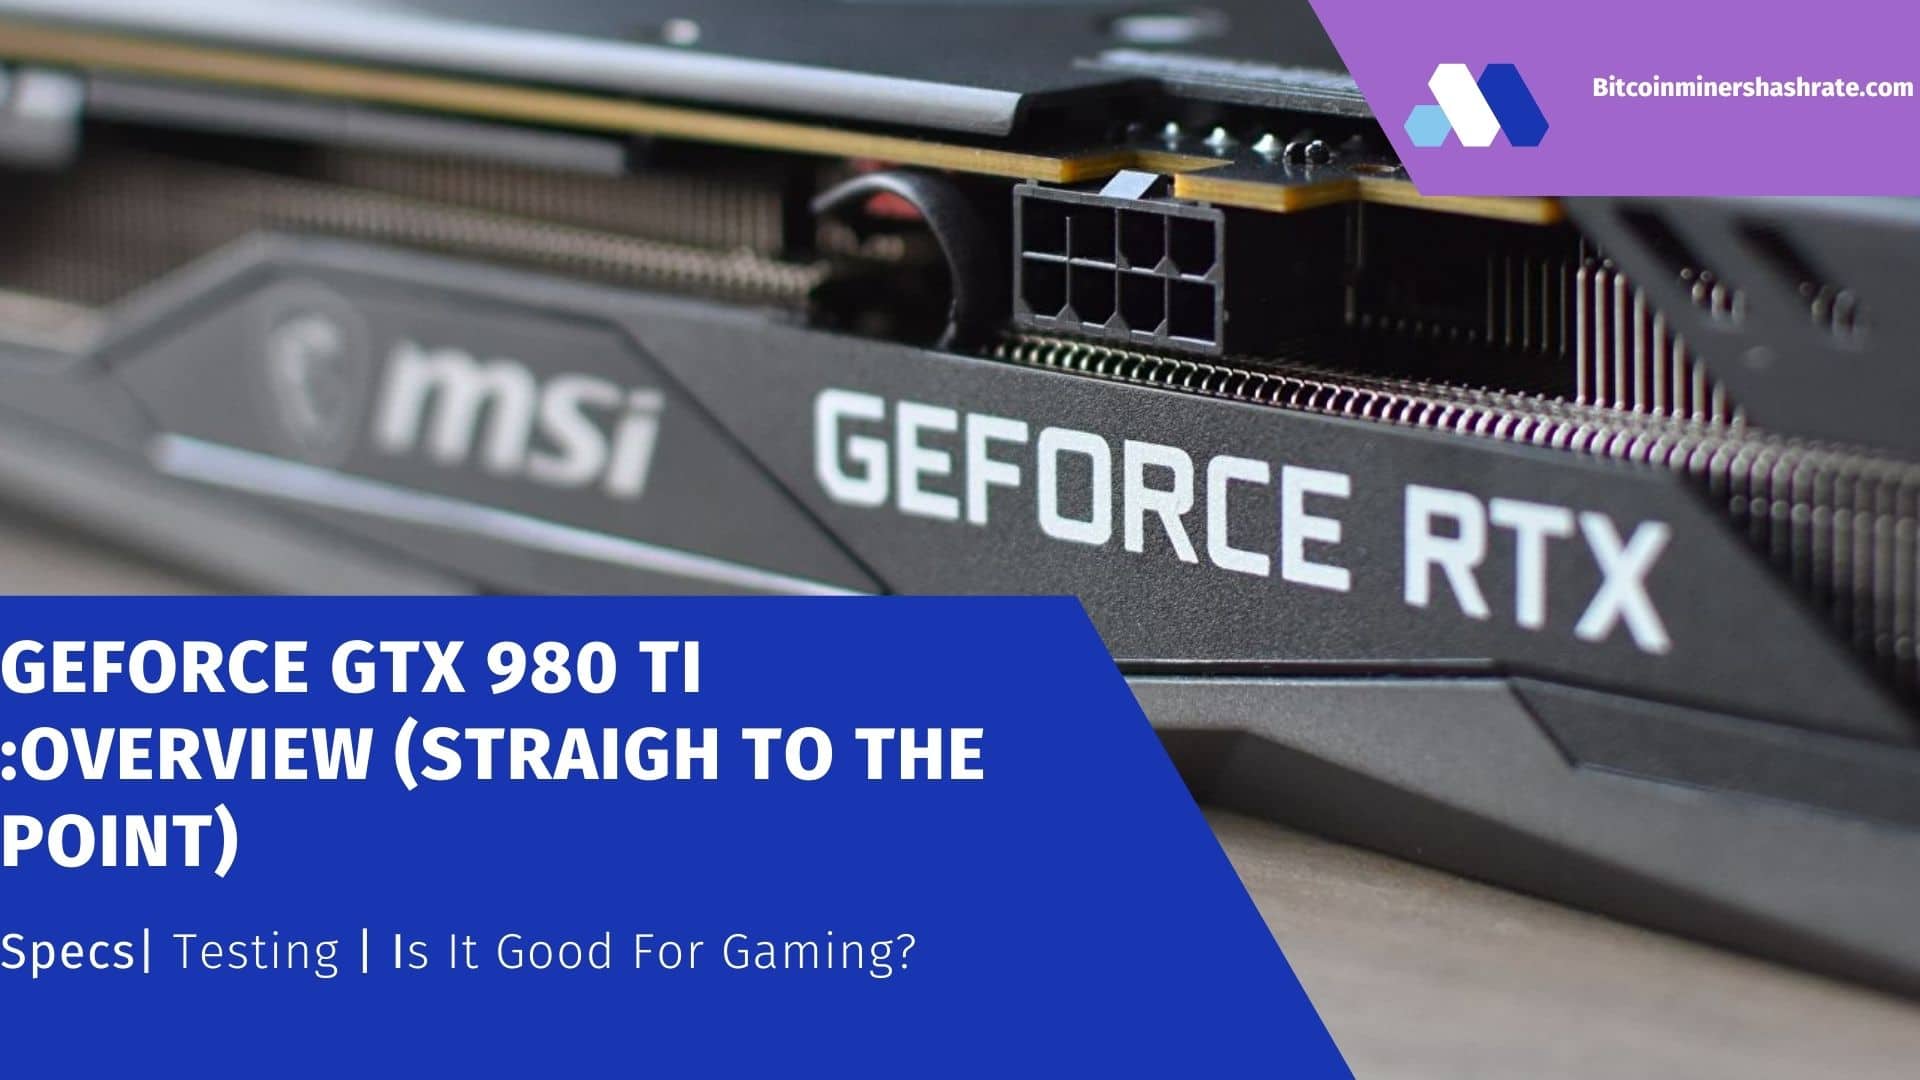 GeForce GTX 980 Ti - Is it Good for Gaming